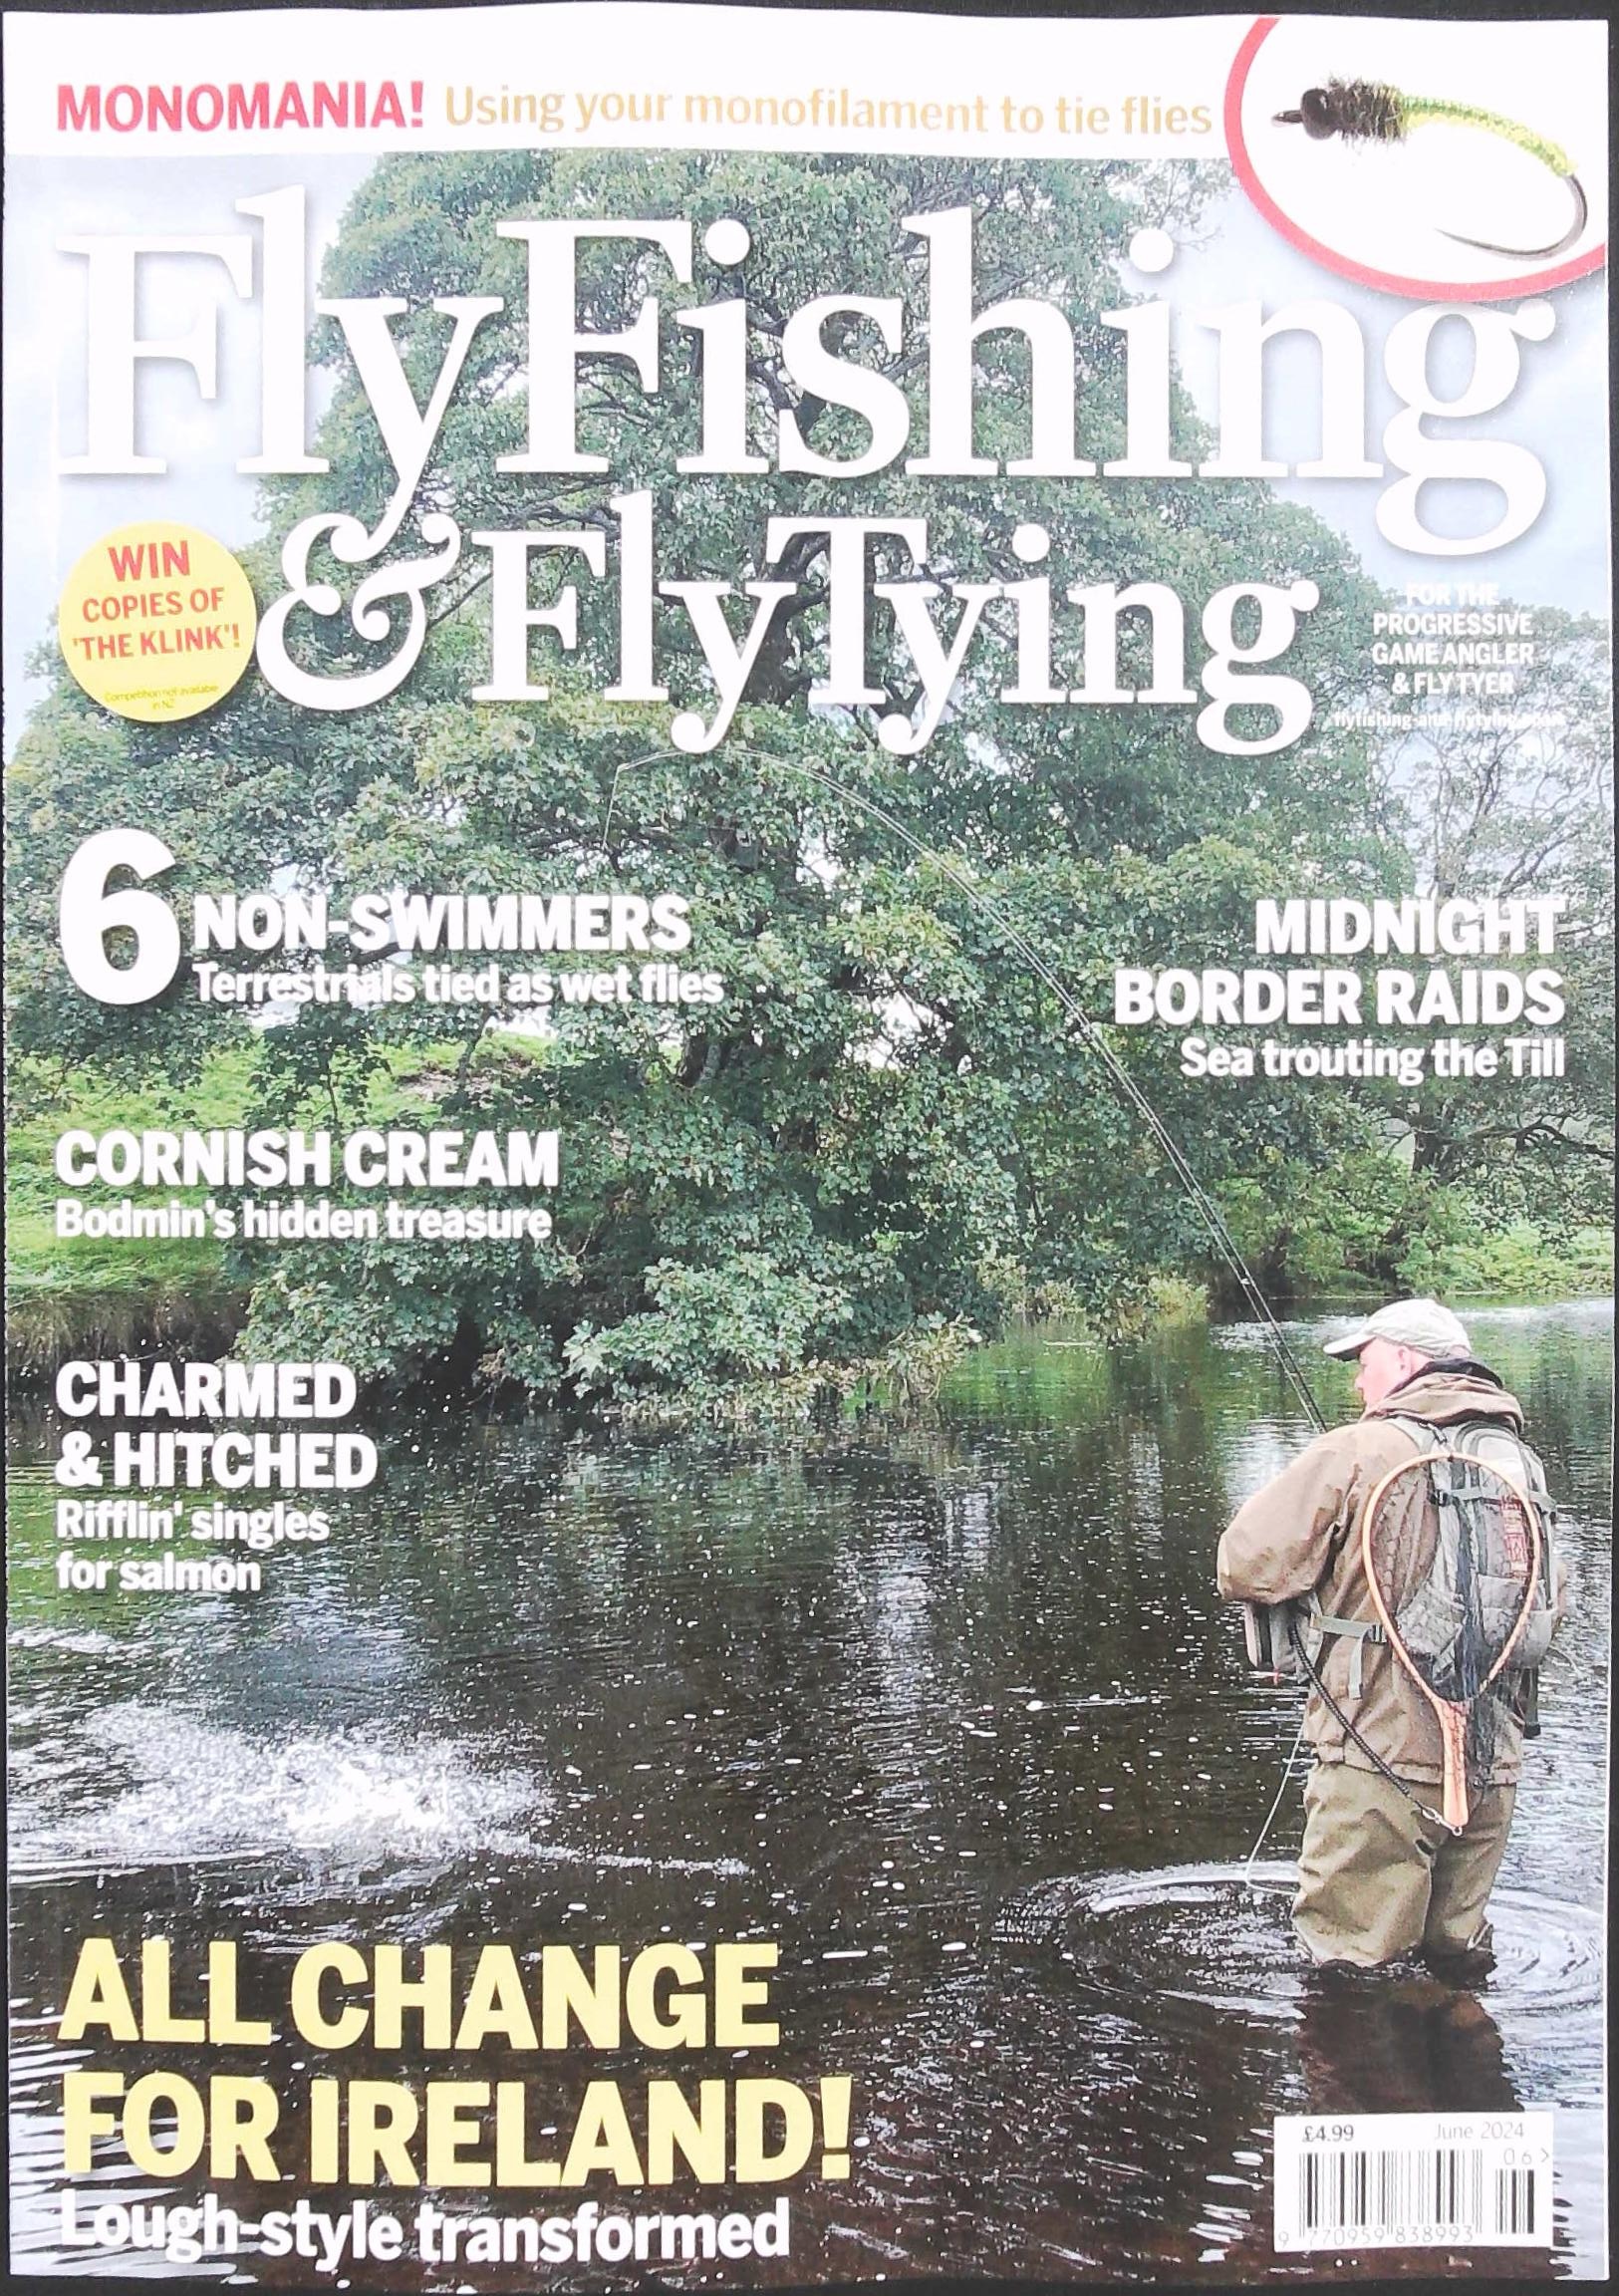 FLY FISHING AND FLY TYING